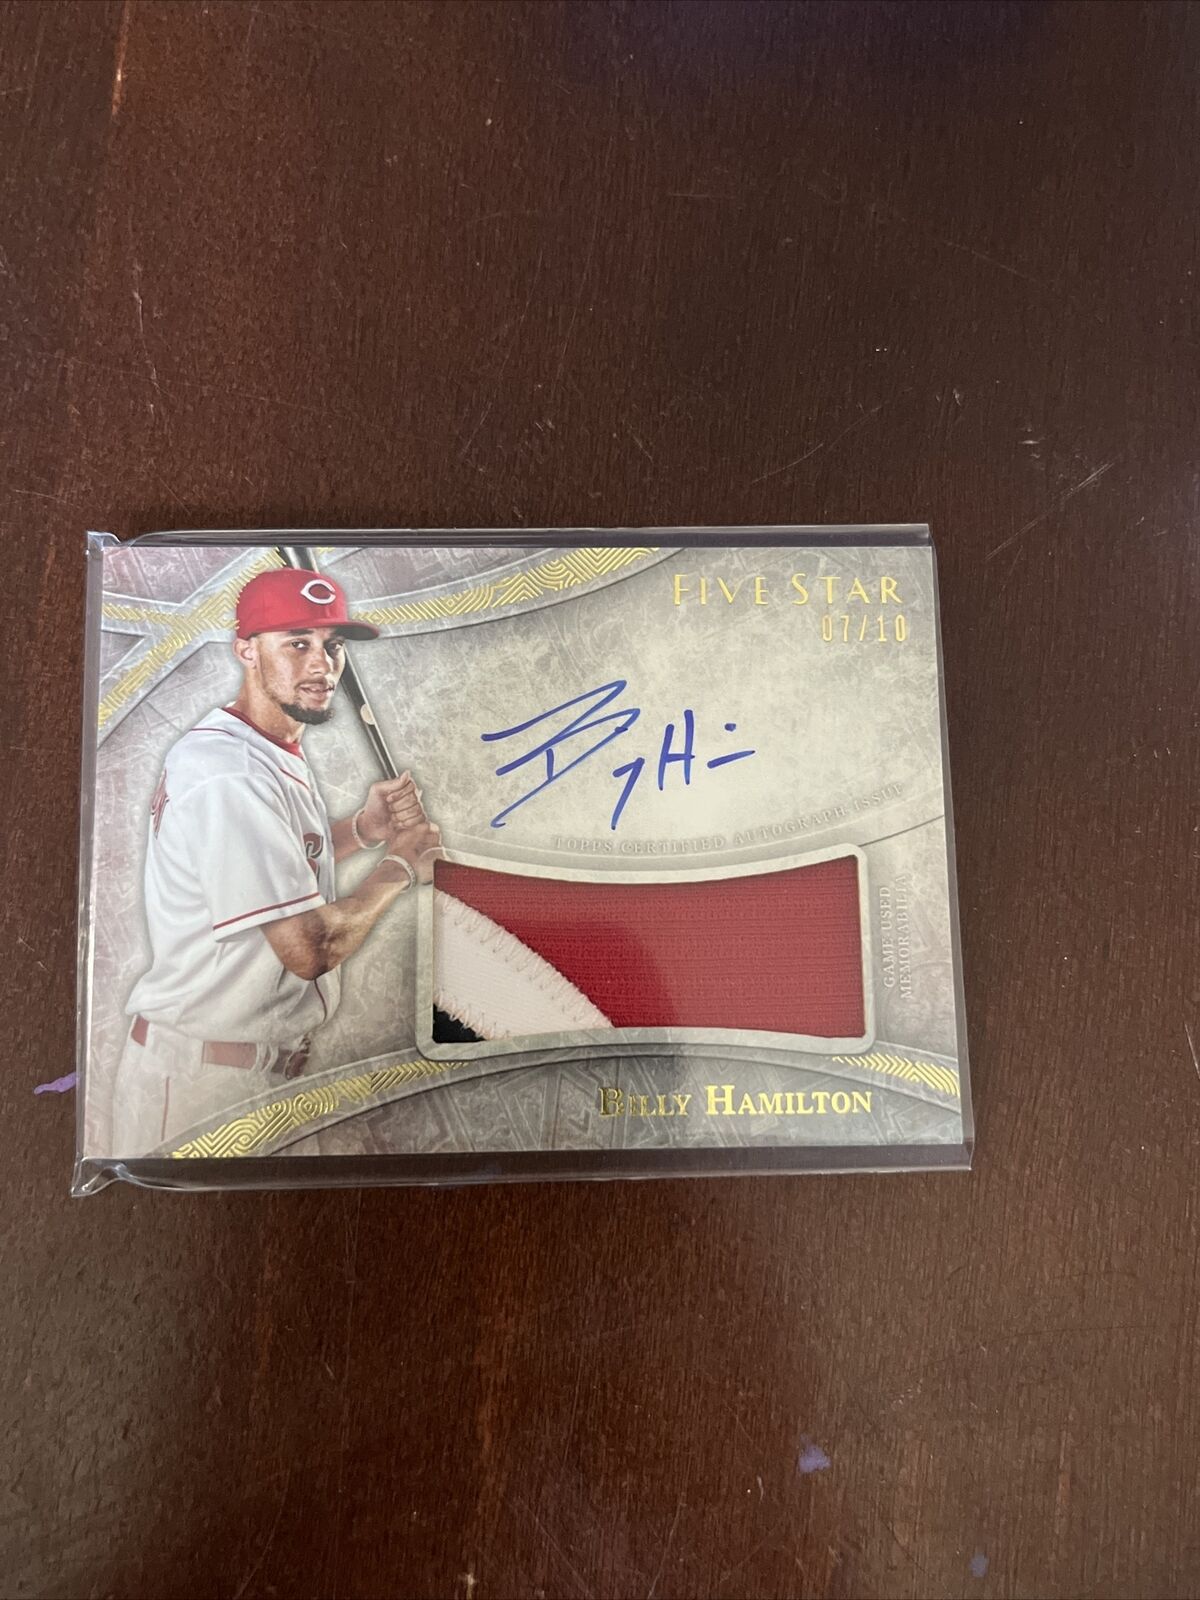 Billy Hamilton 2014 Topps Five Star Autograph Jumbo Patch Gold 7/10 Reds